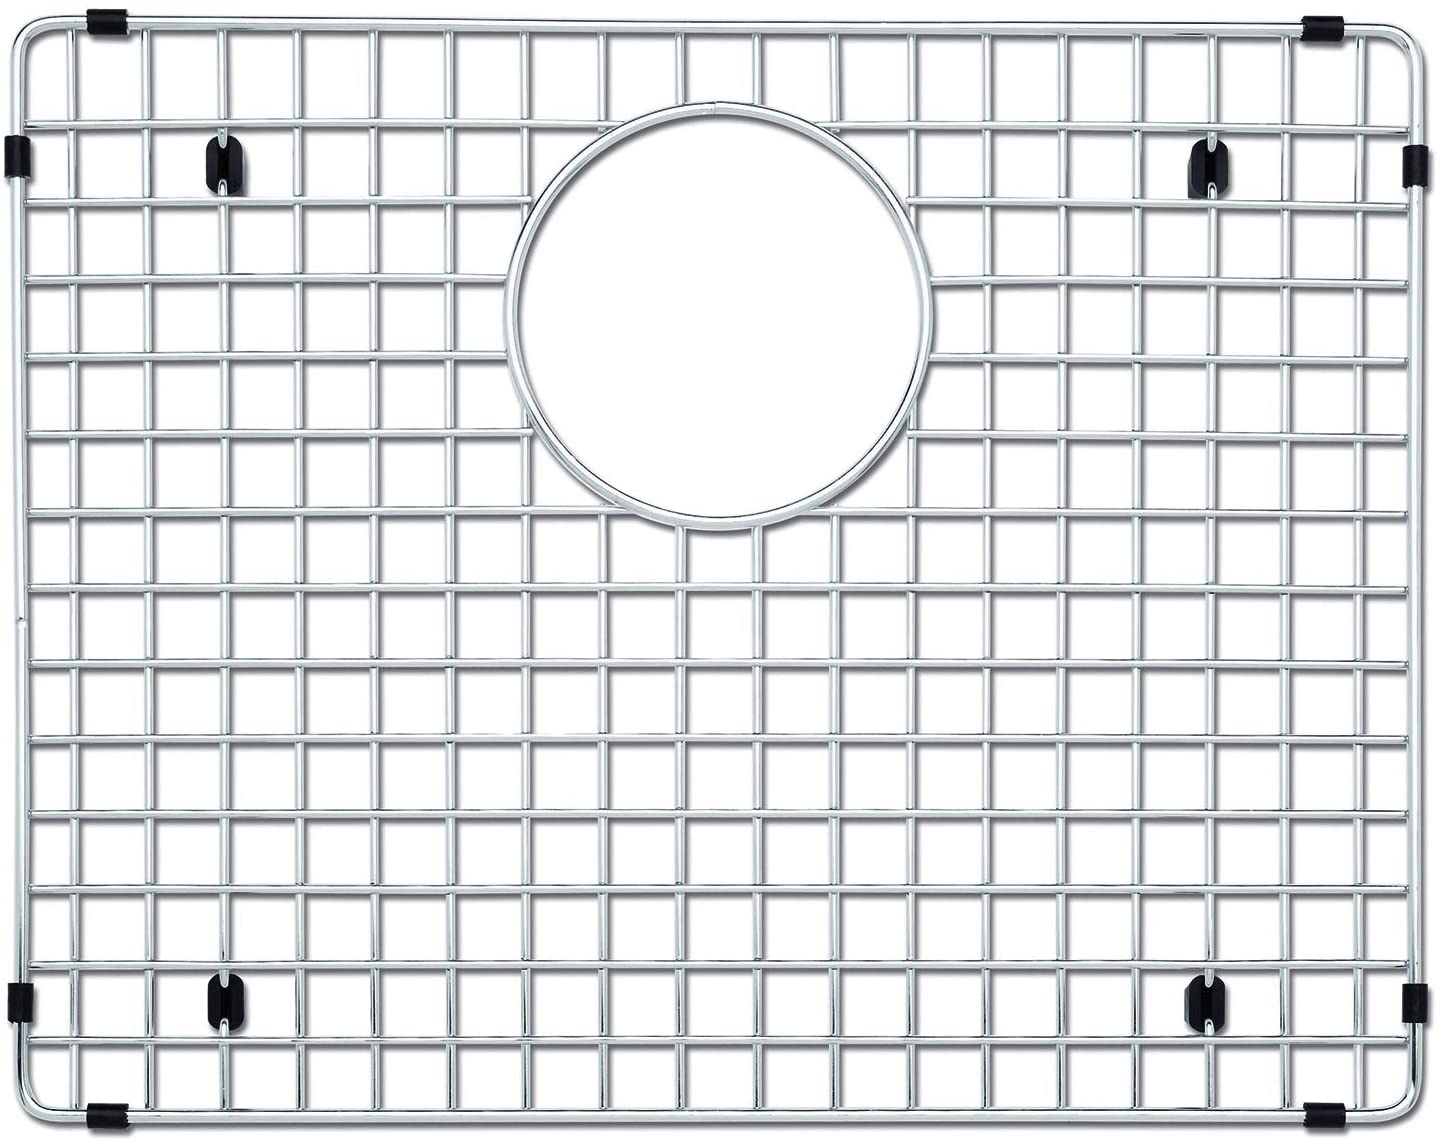 Stainless Steel Kitchen Sink Grid - BLANCO Sink Protector (Precision 16" sinks)